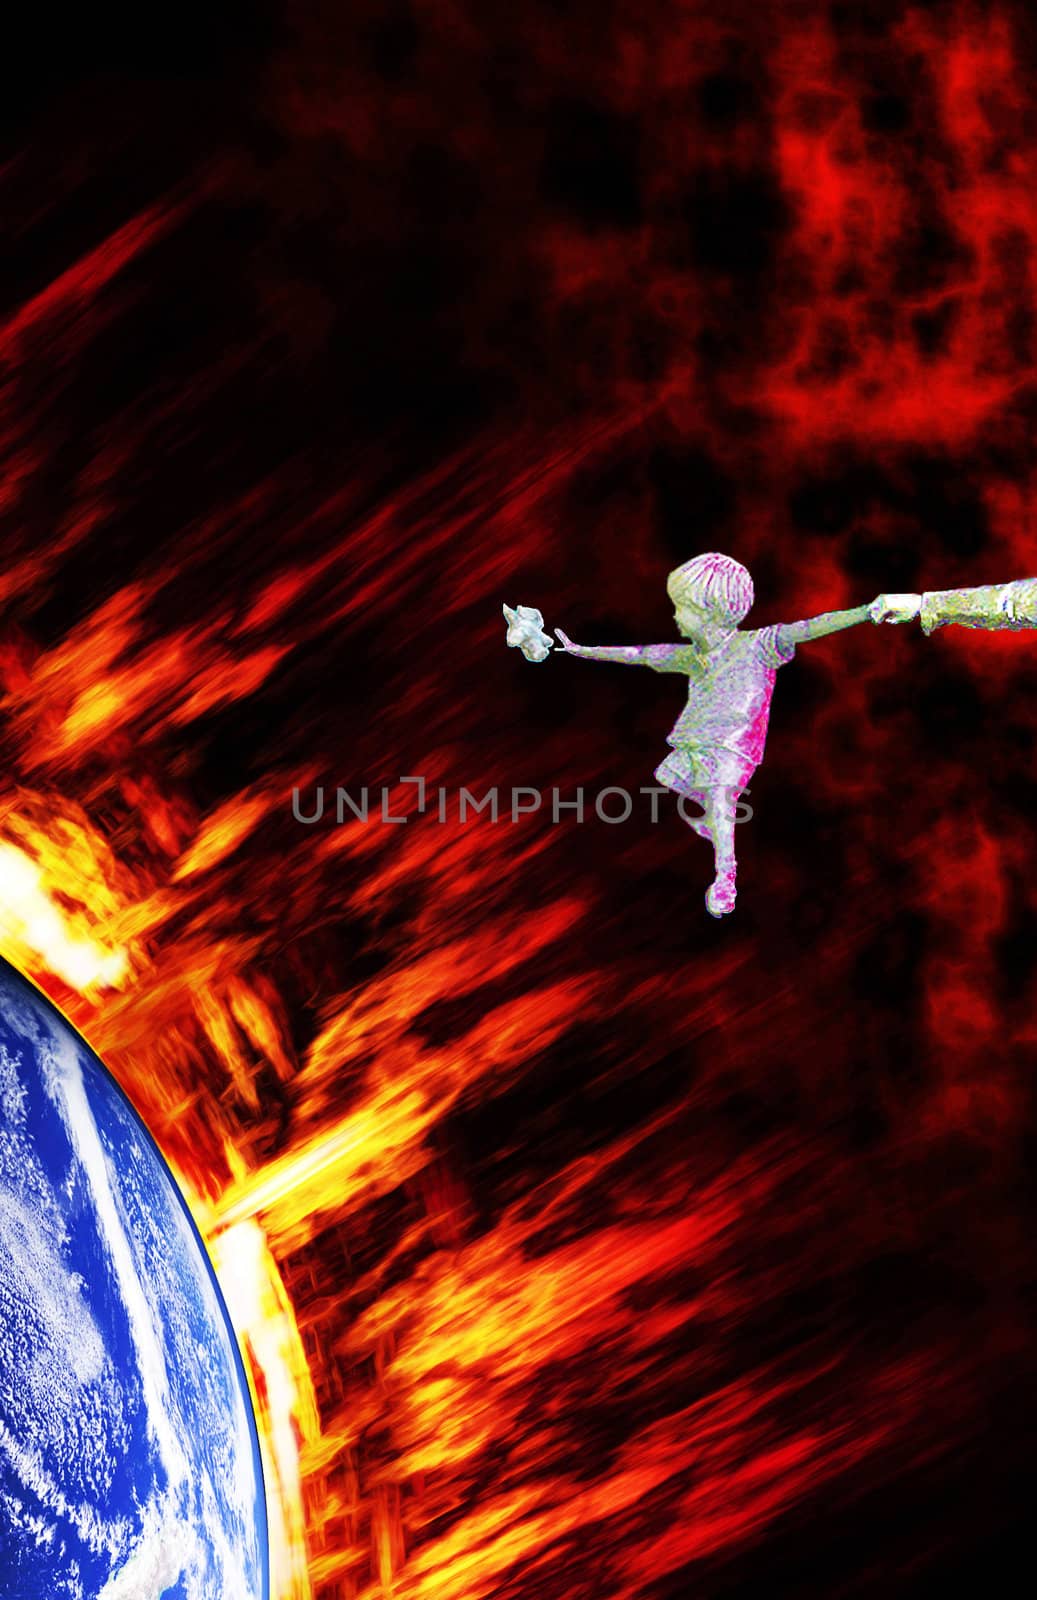 Earth gets more and more dangerous in many ways, e.g. through global warming, caused by the greenhouse effect, or the burning of natural ressoures such as oil and gas. So, humanity has to leave Earth in a worst Case Scenario. The picture shows a kid reaching for his teddy before the heat kills him and his mother reaching for her boy